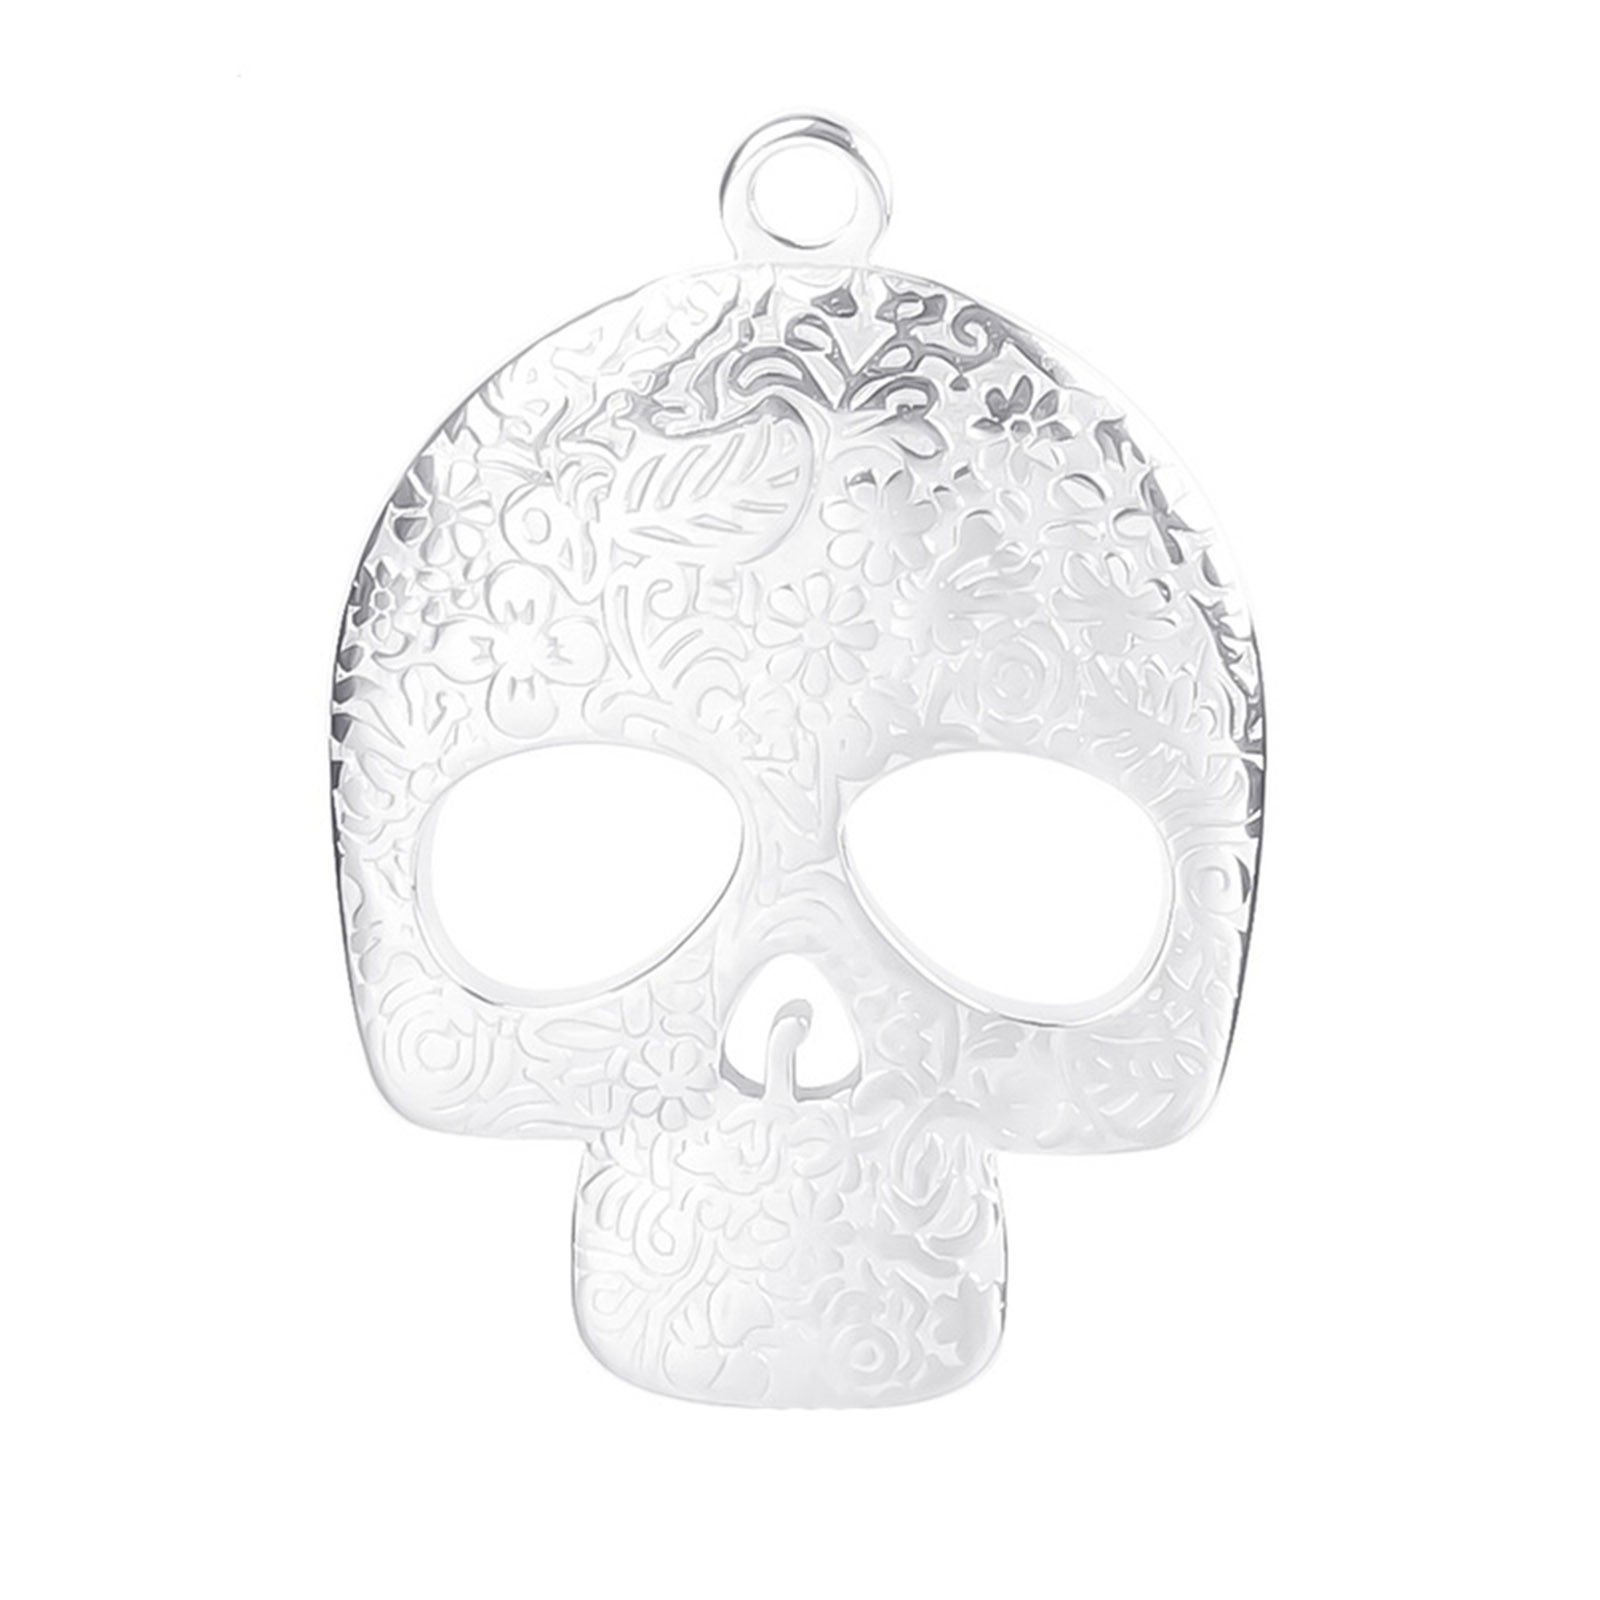 Picture of Stainless Steel Halloween Charms Silver Tone Skull Carved Pattern Hollow 3cm x 2.2cm, 2 PCs